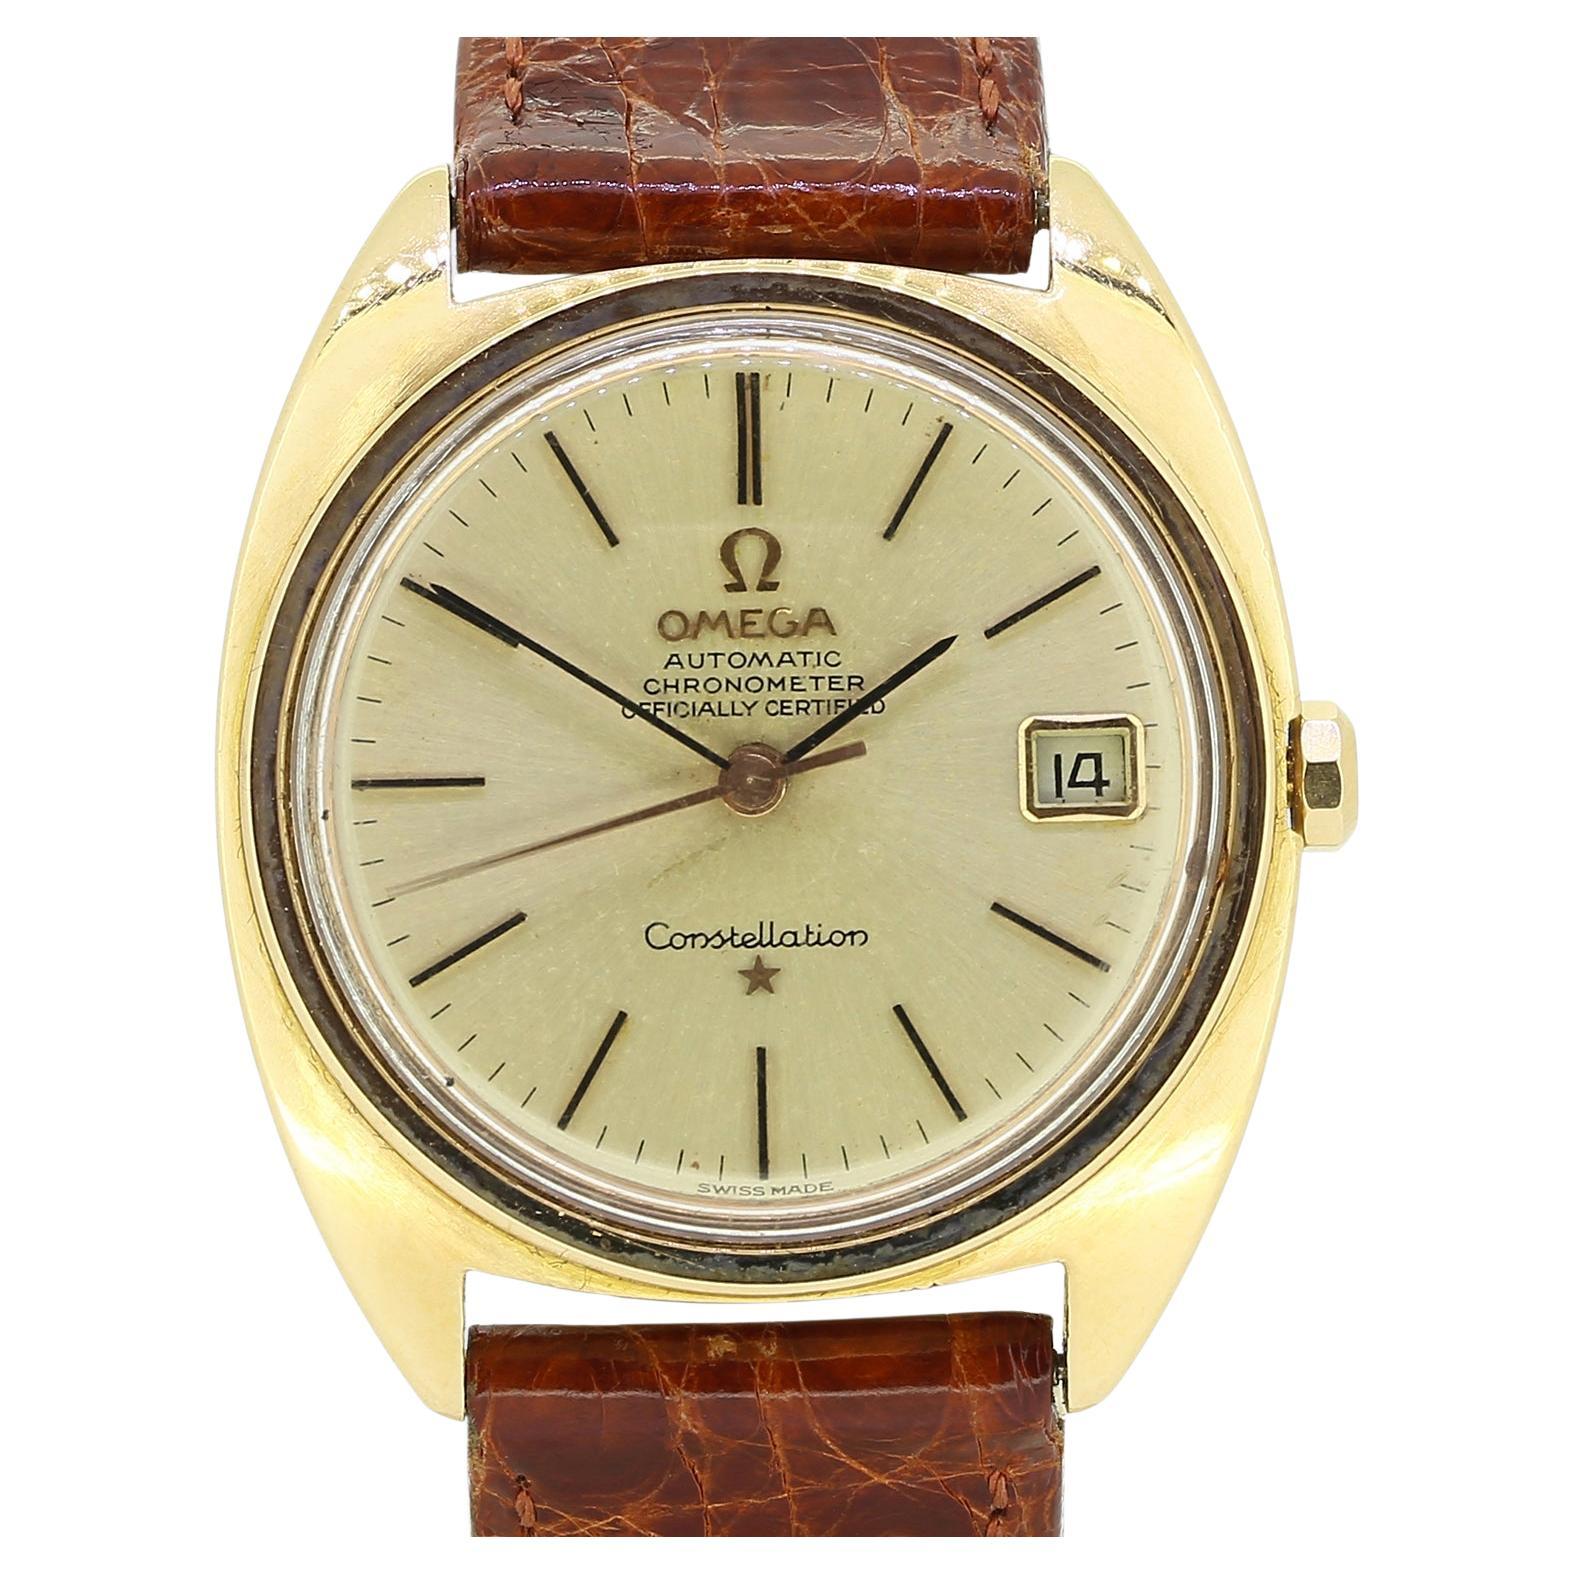 Montre vintage Omega Automatic Constellation